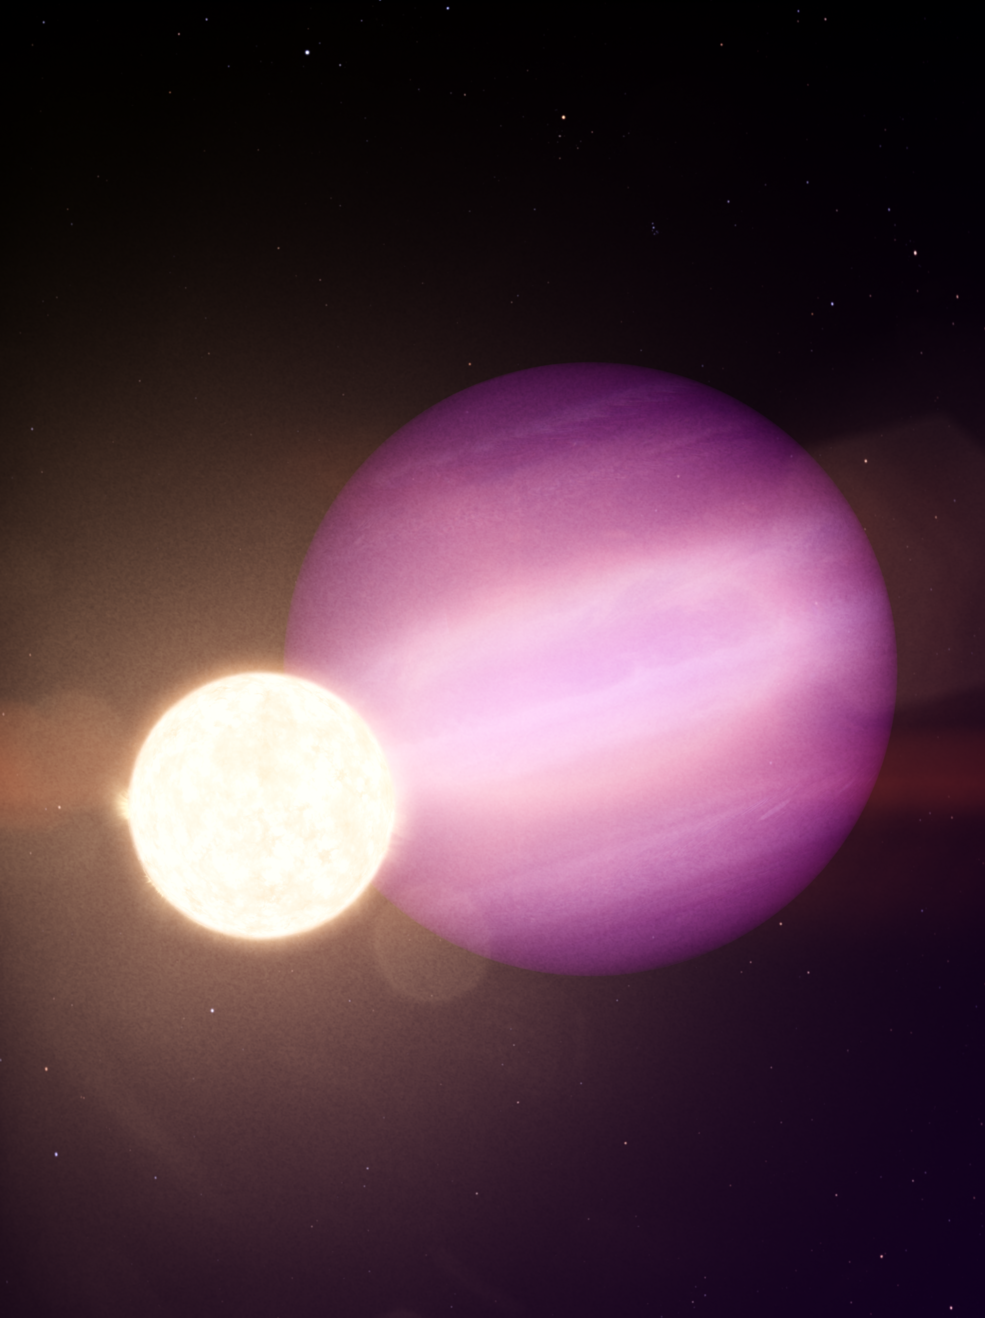 WD 1856 b, illustrated, a potential Jupiter-sized planet orbiting its much smaller host star, a dim white dwarf